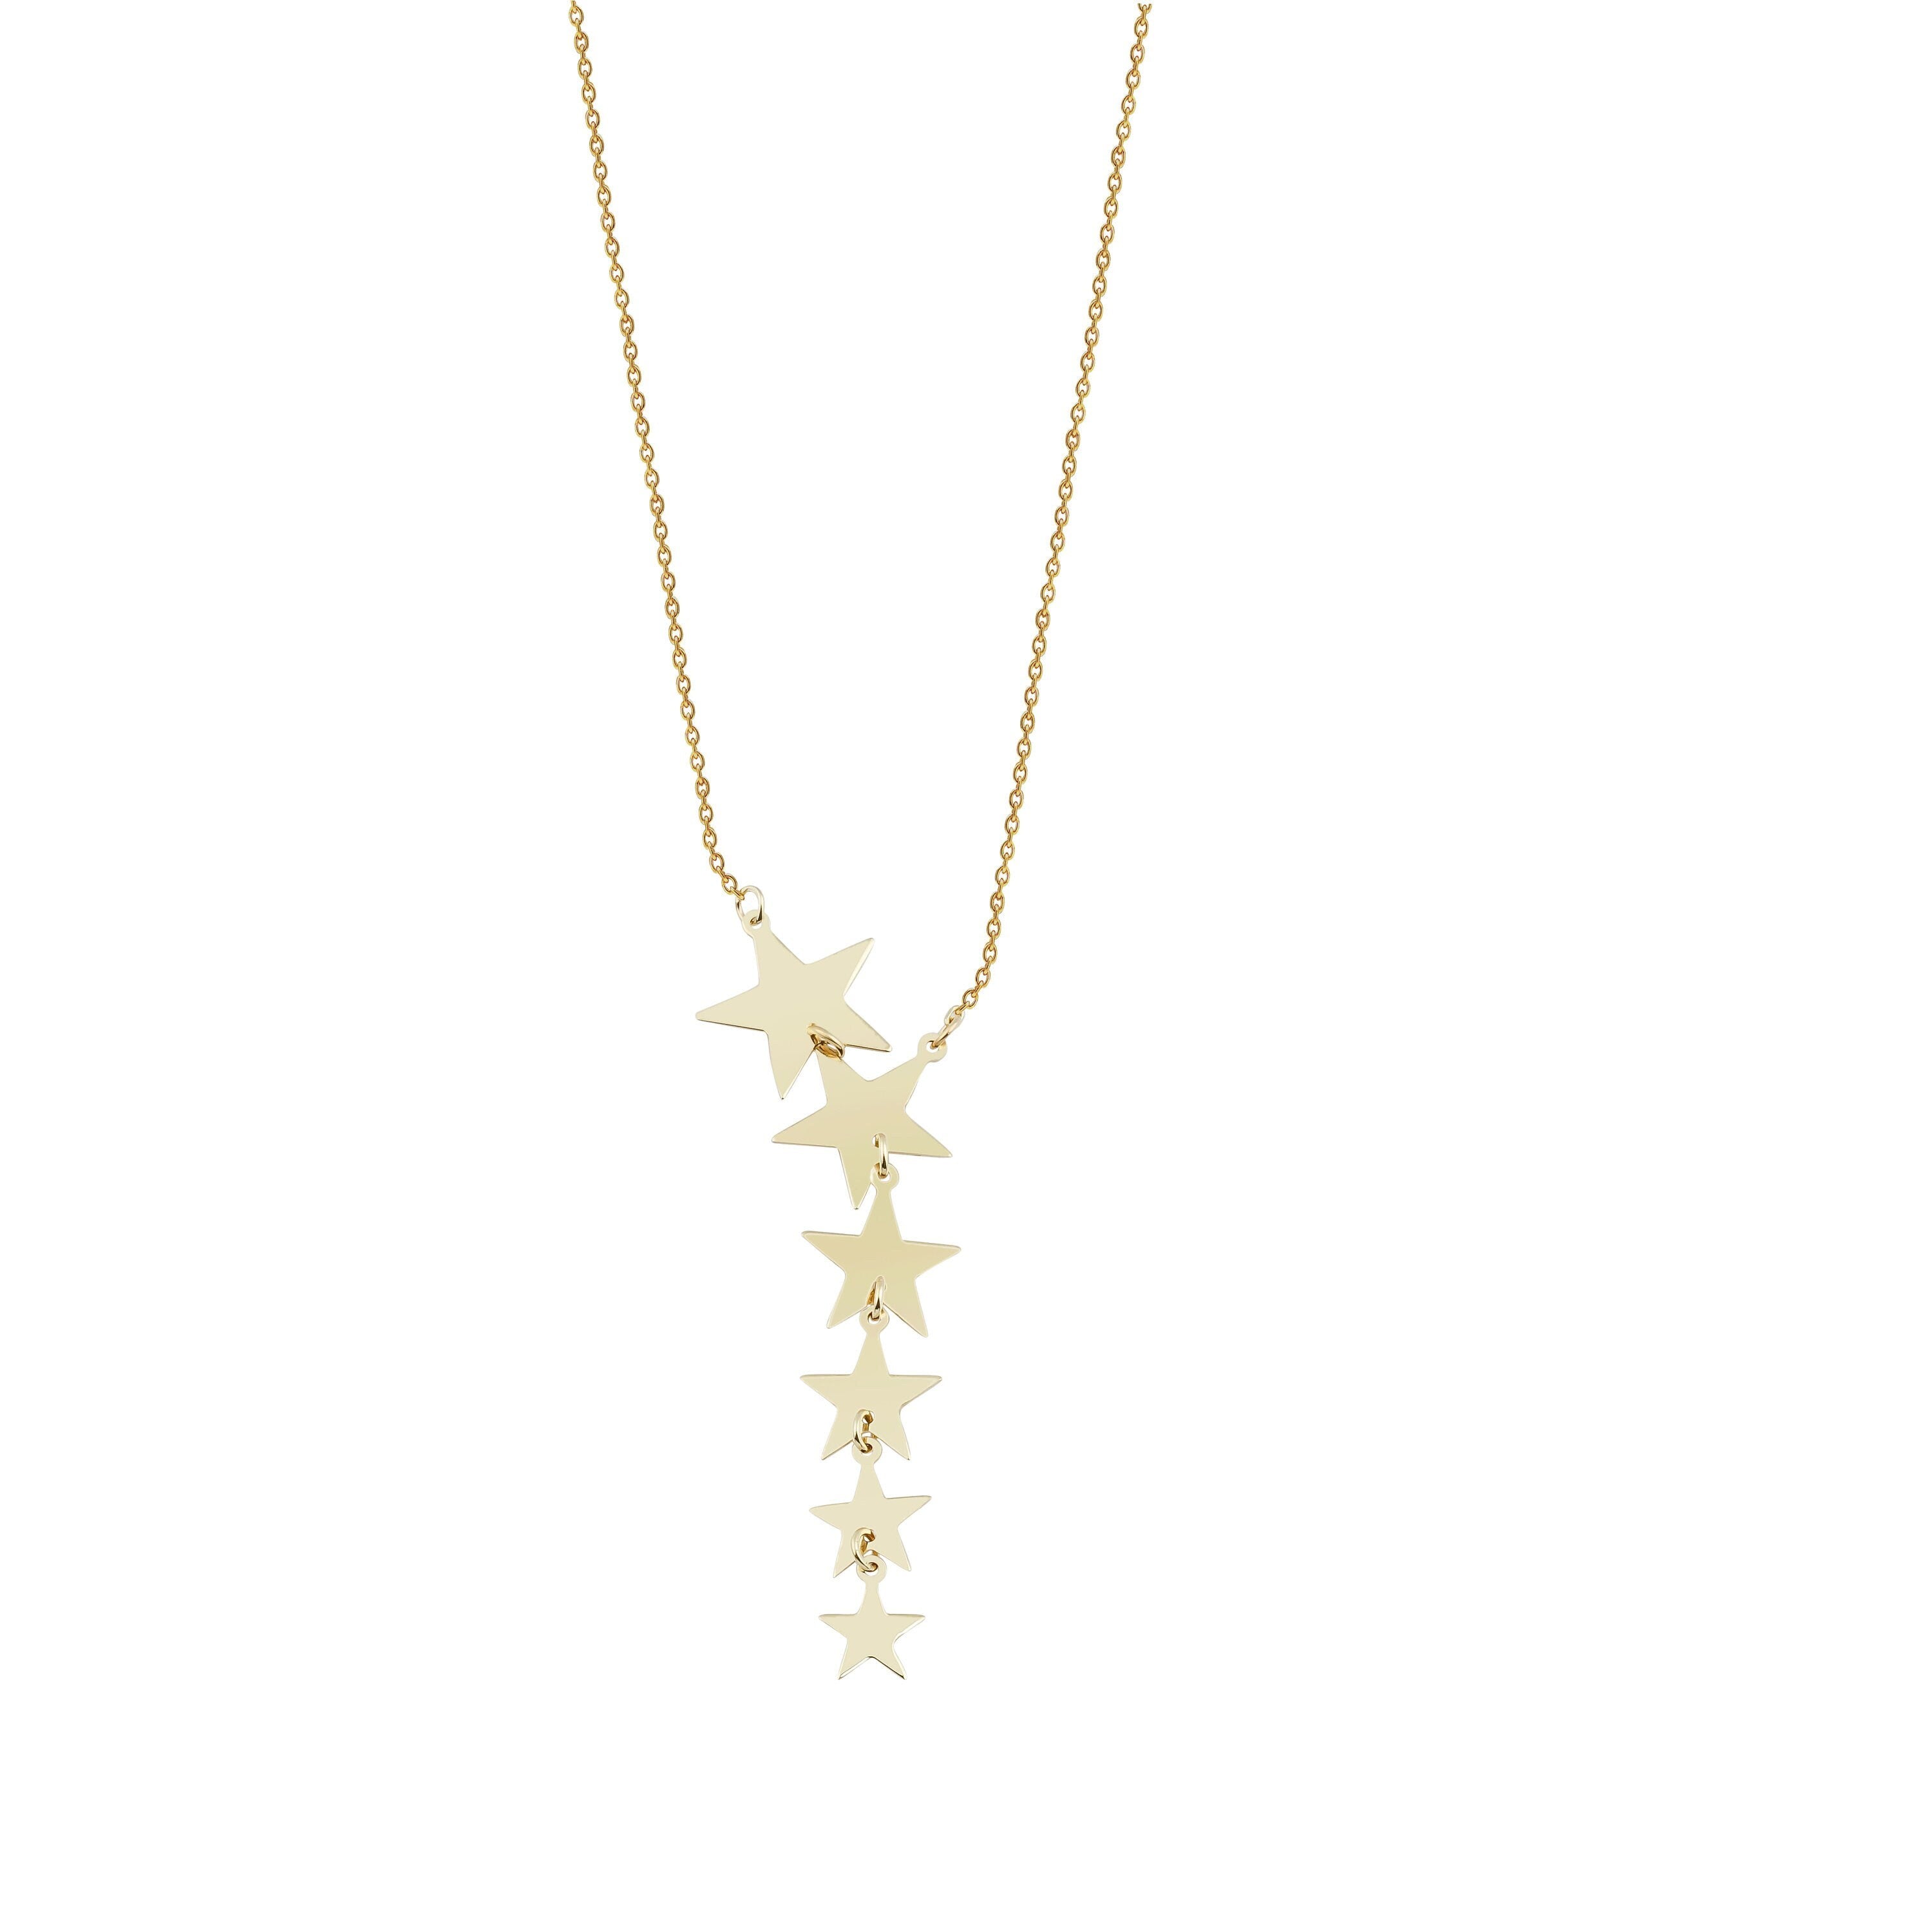 Star Lariat Necklace in 14K Gold